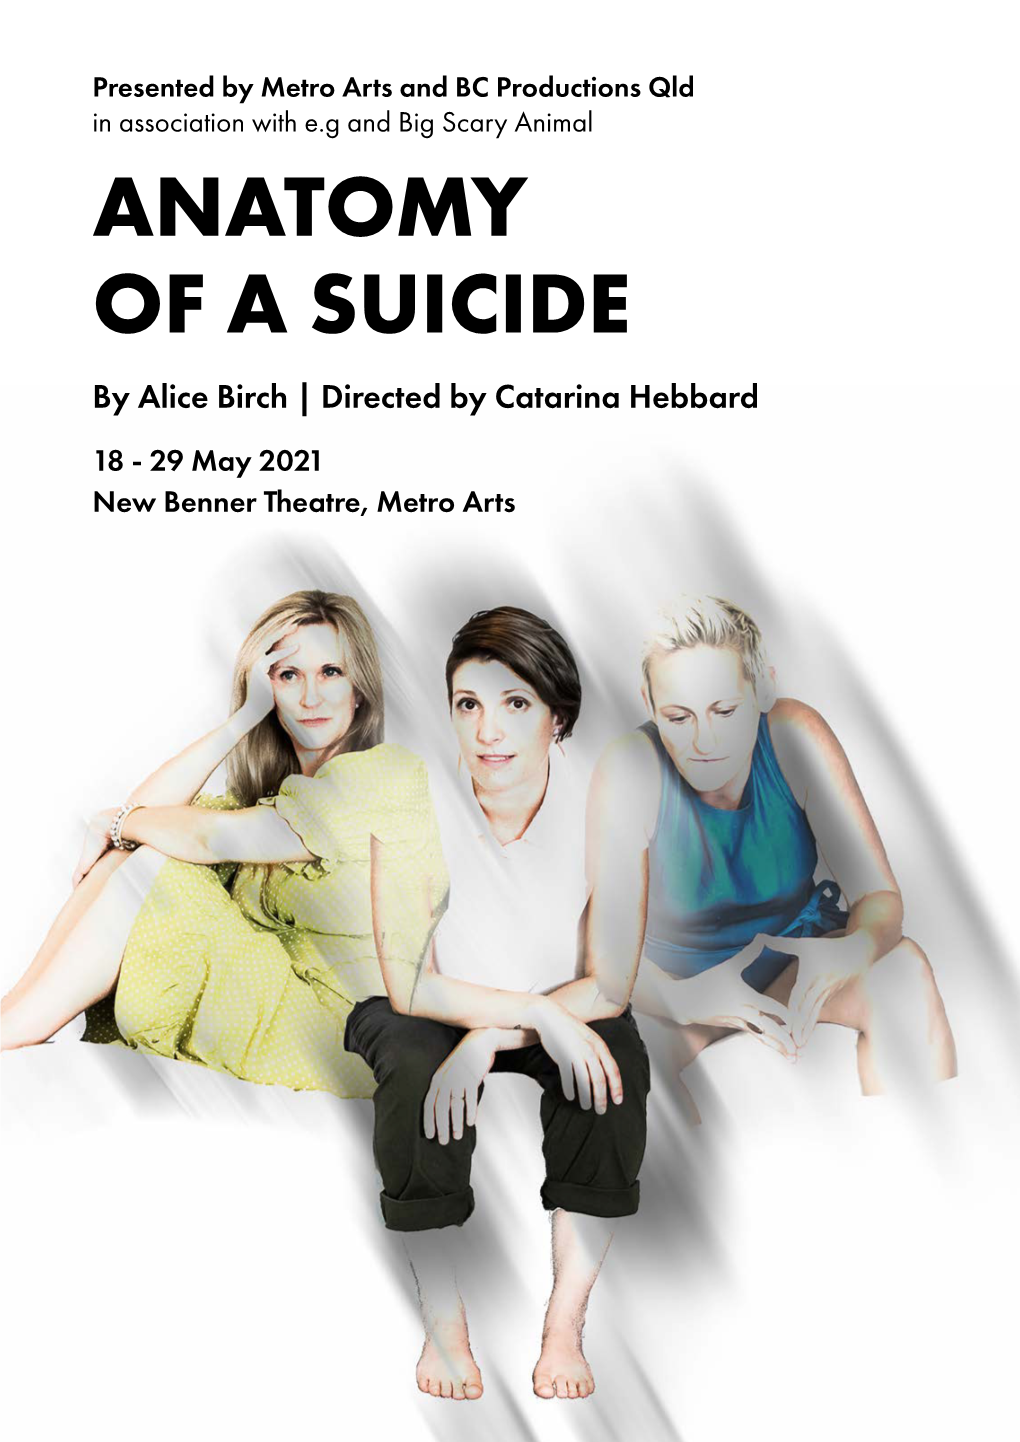 ANATOMY of a SUICIDE by Alice Birch | Directed by Catarina Hebbard